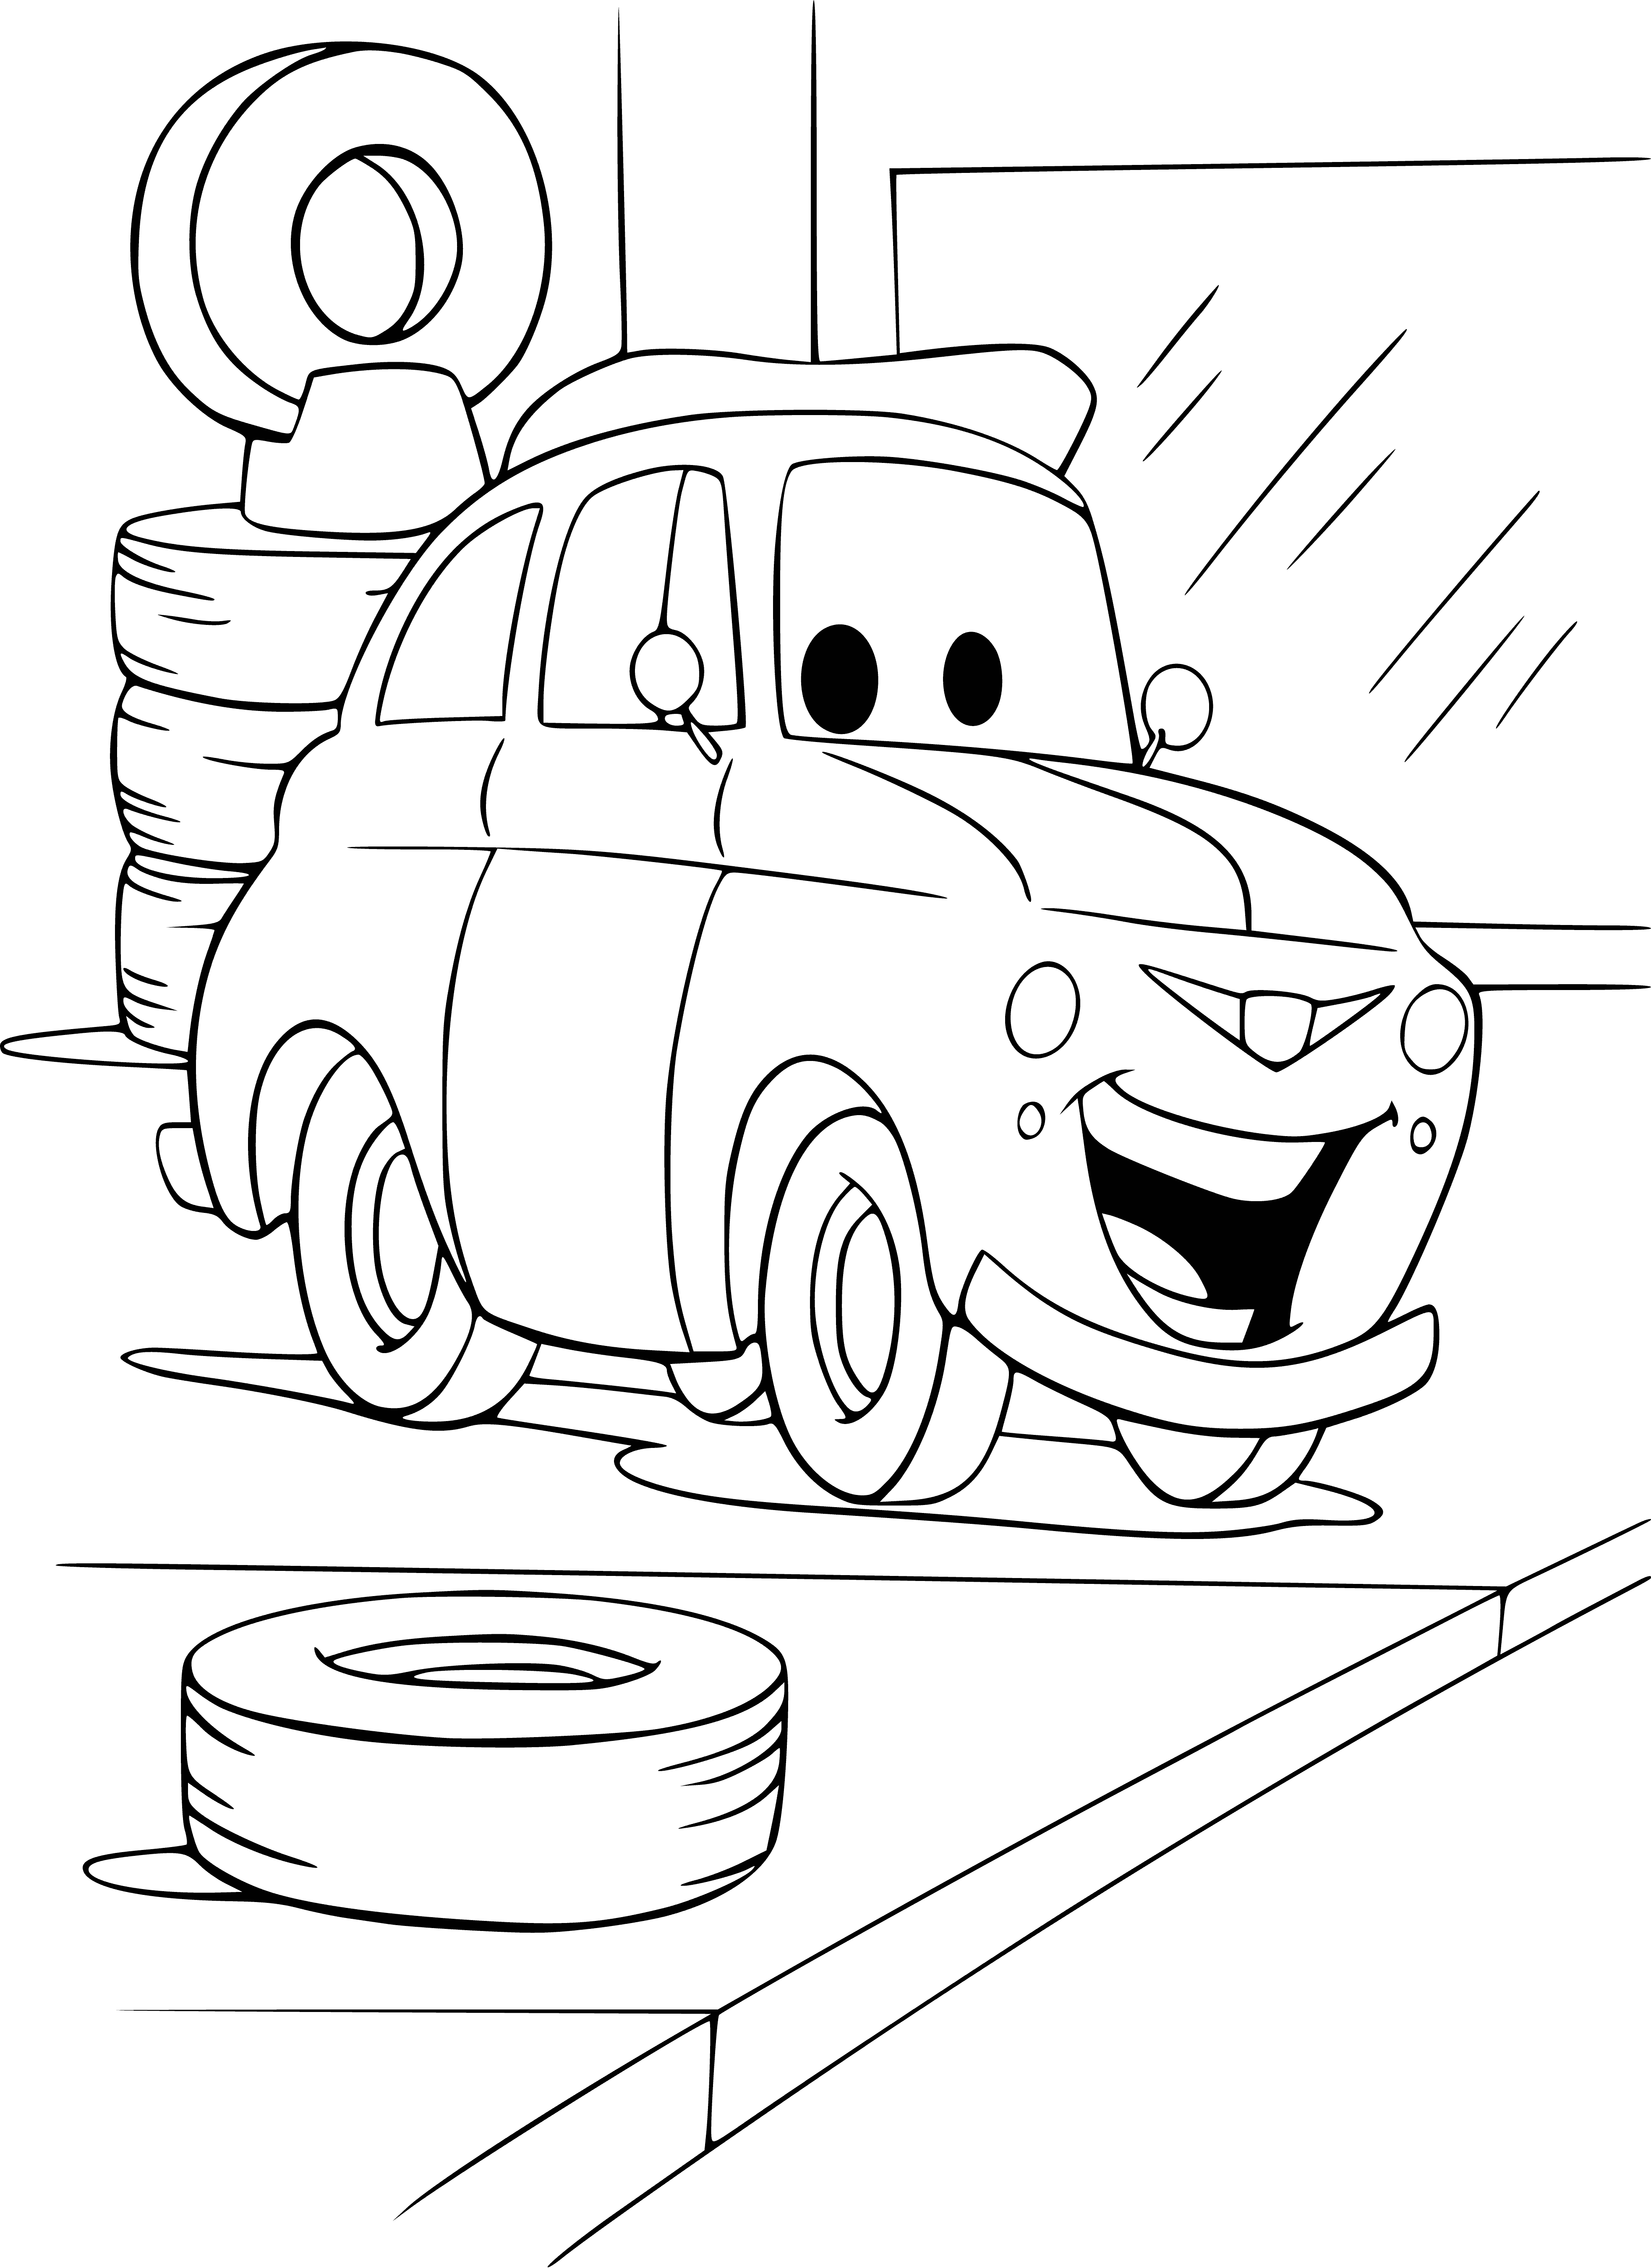 coloring page: Luigi is an Italian car with a mustache & best buddies w/ Lightning McQueen & Mater, from "Cars" movie franchise.